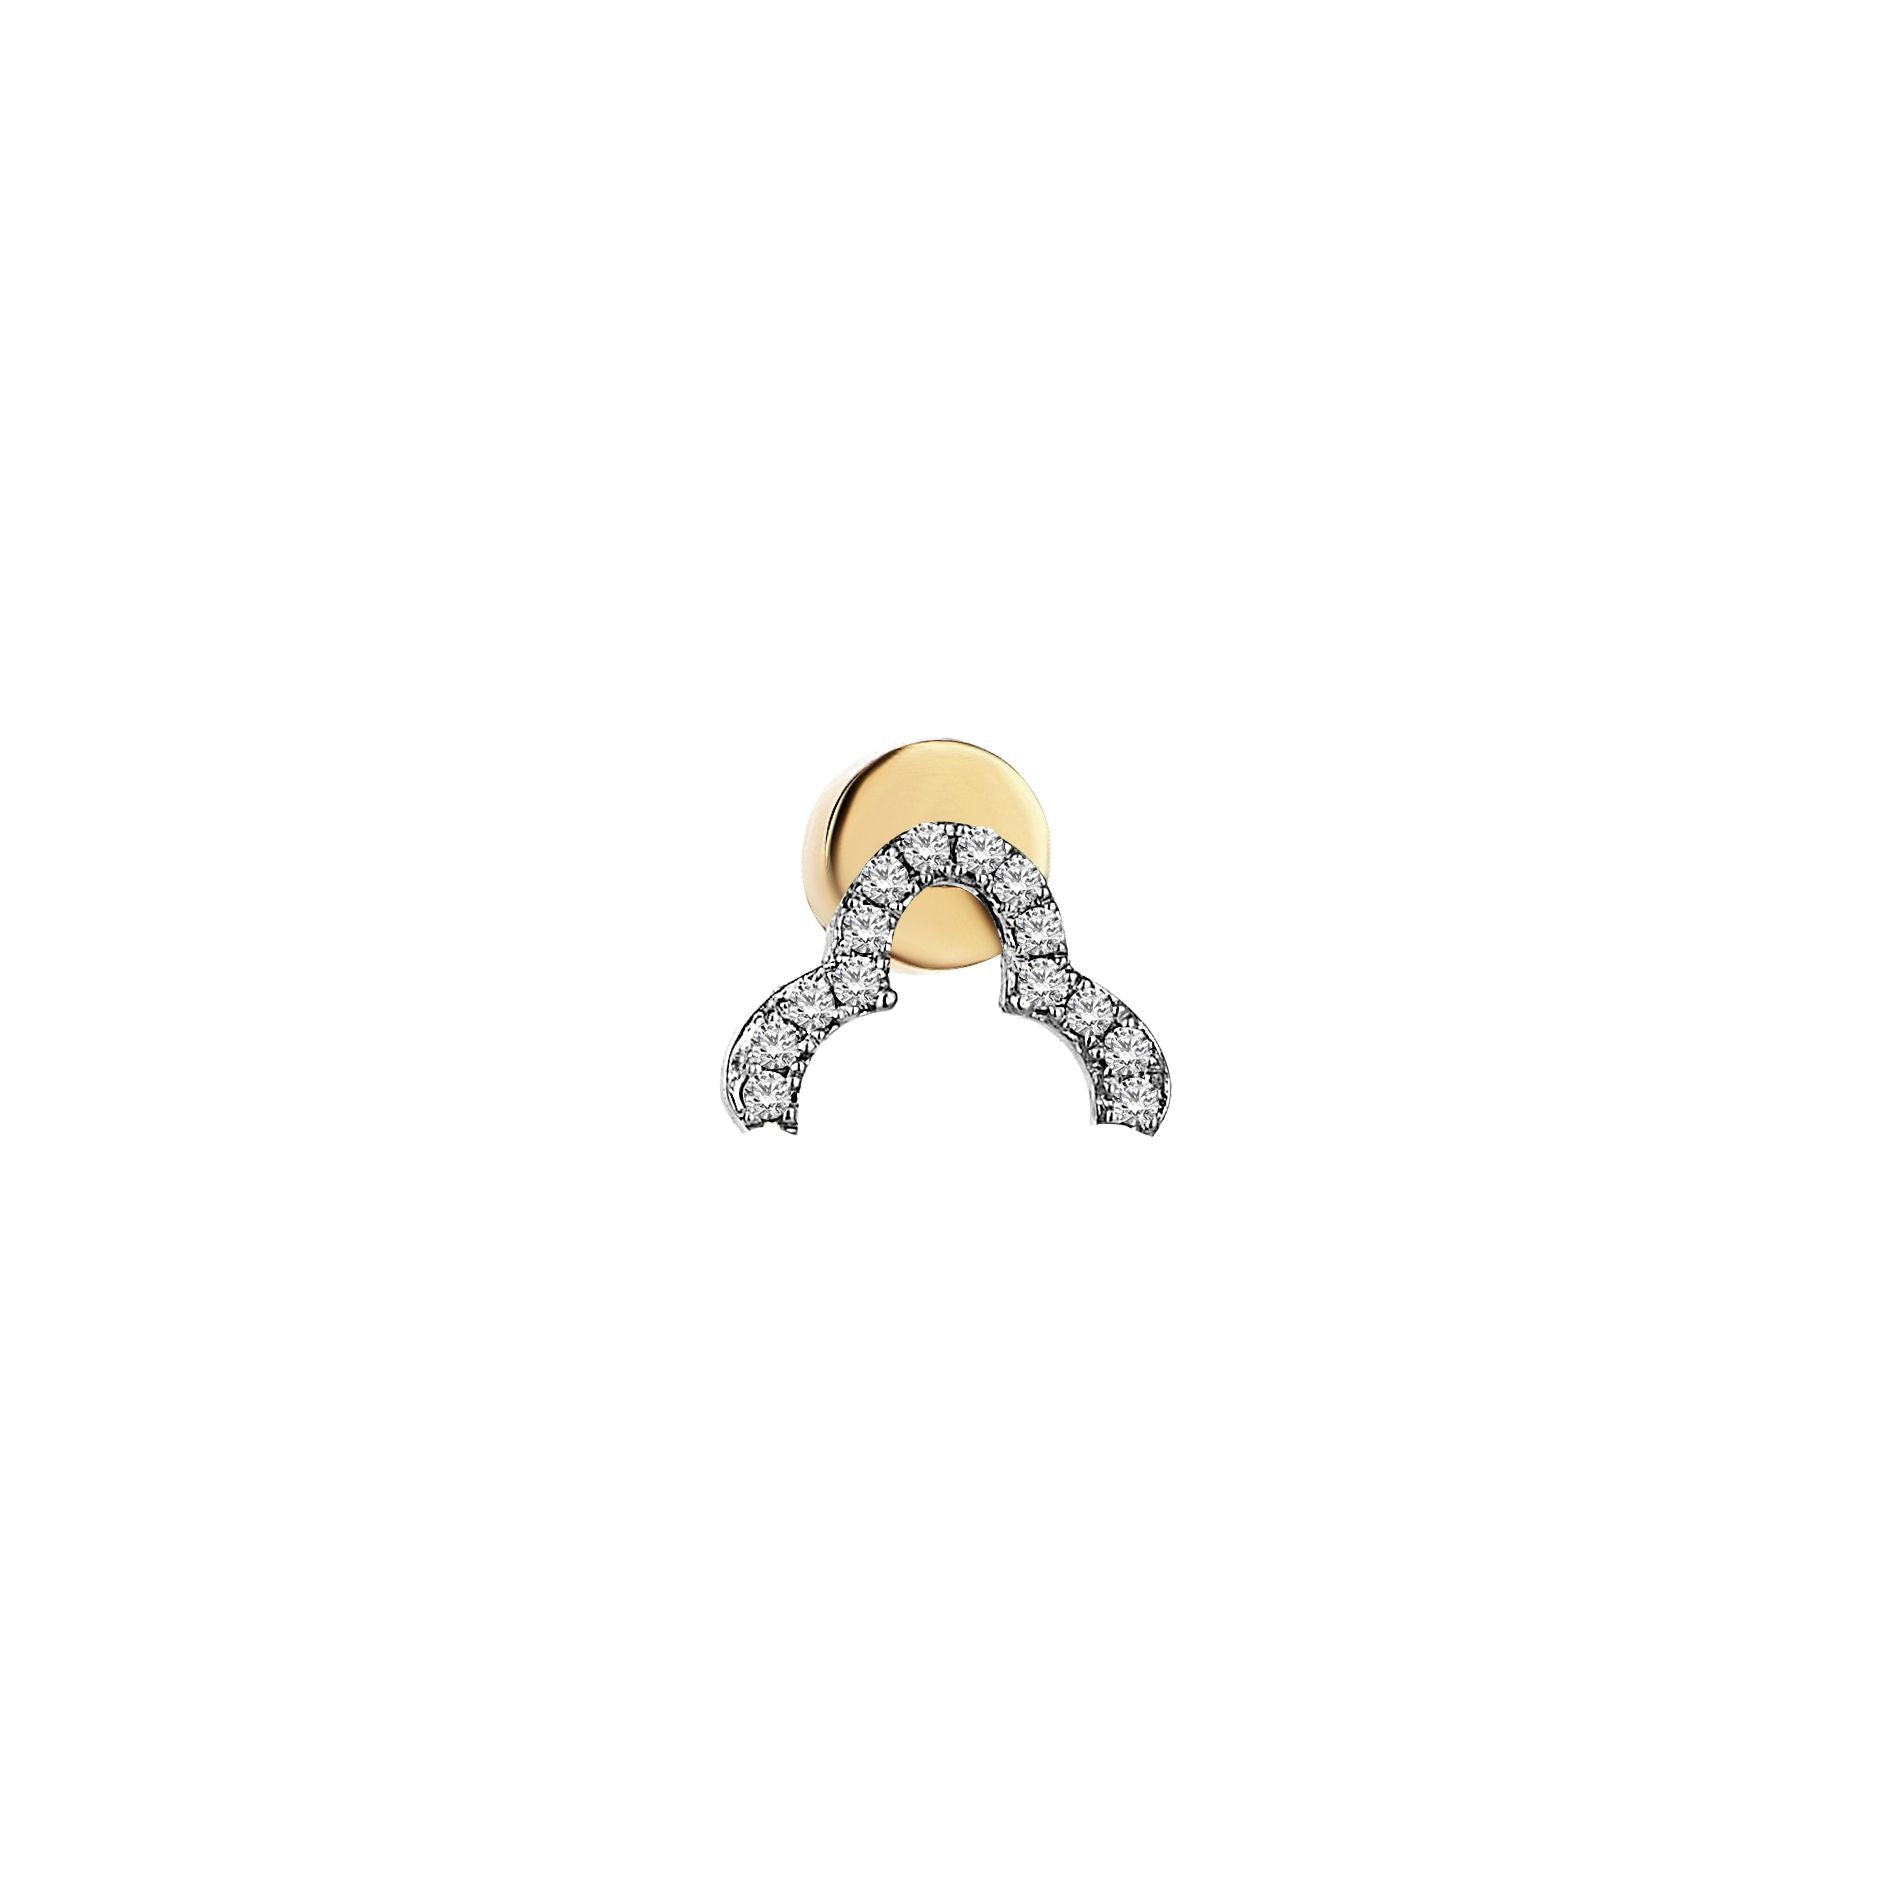 Round Trefoil Arch Earring in Yellow Gold - Her Story Shop